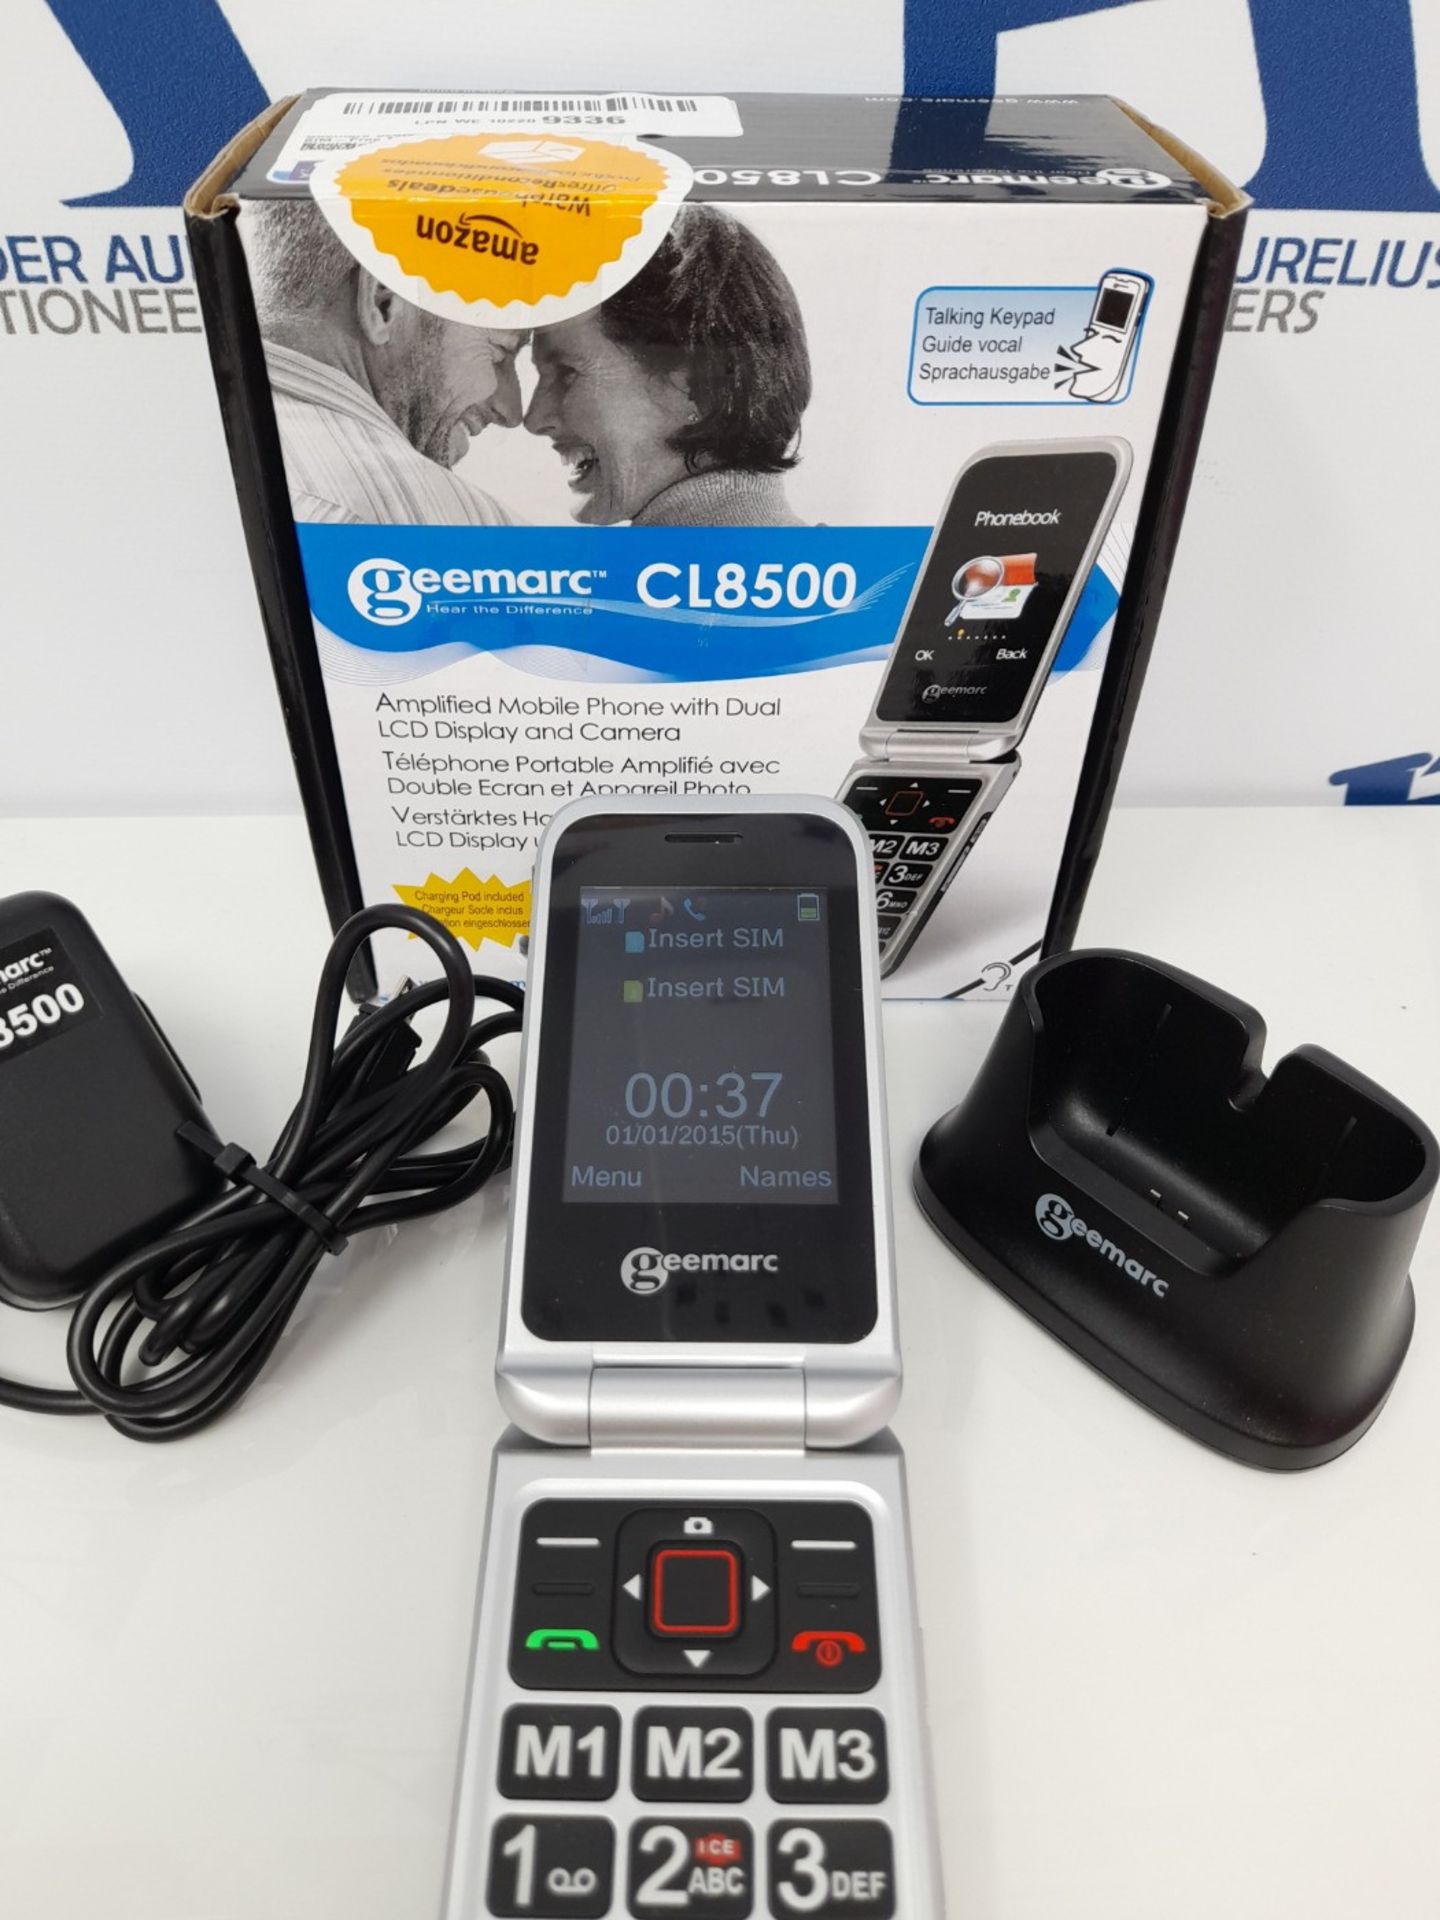 RRP £69.00 Geemarc CL8500 - Amplified Big Button Clamshell SIM-Free Mobile Phone with Dual LCD Di - Image 3 of 3